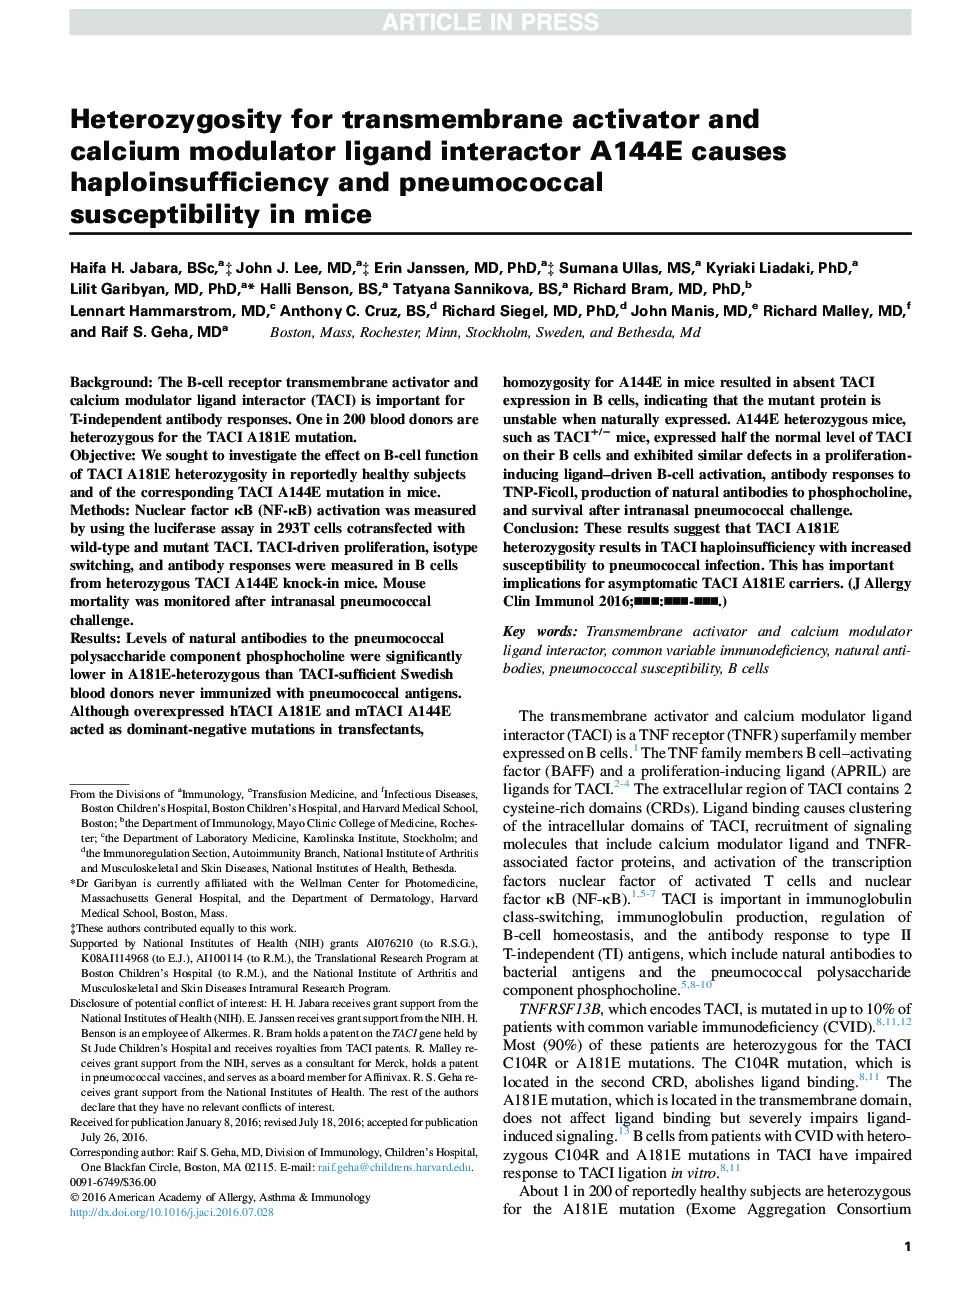 Heterozygosity for transmembrane activator and calcium modulator ligand interactor A144E causes haploinsufficiency and pneumococcal susceptibility in mice